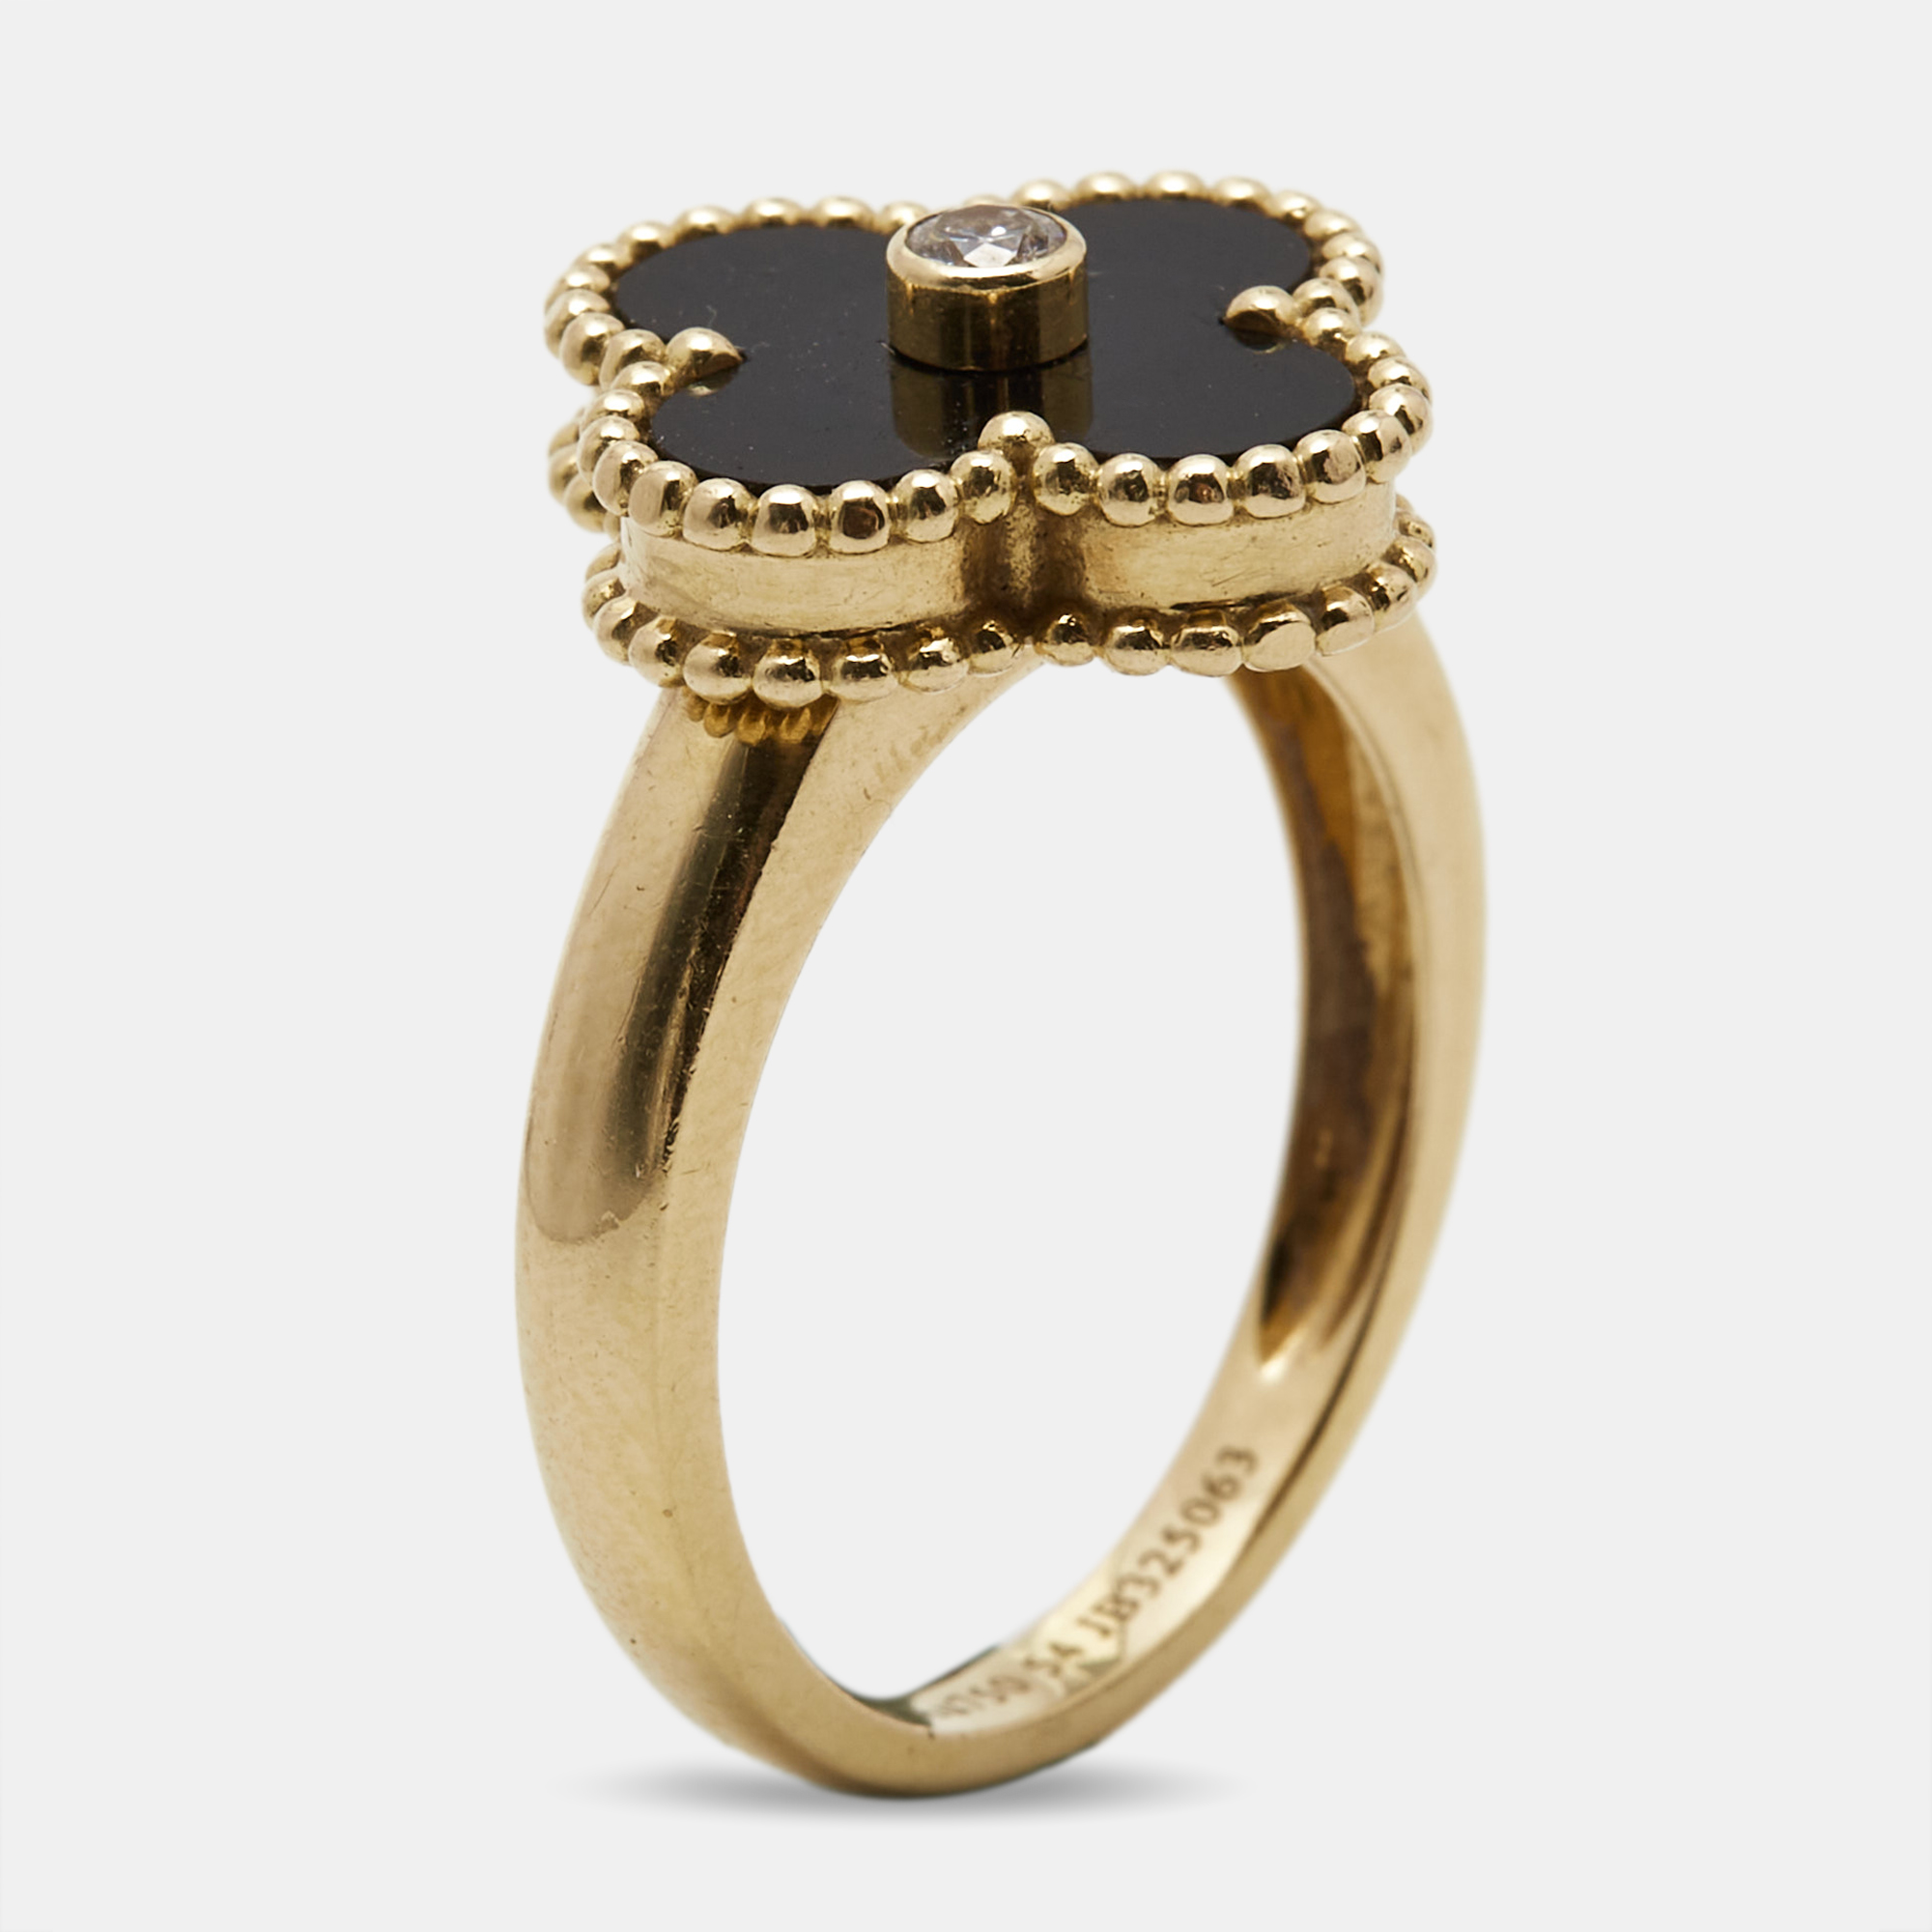 Pre-owned Van Cleef & Arpels Vintage Alhambra Onyx Diamond 18k Yellow Gold Ring Size 54